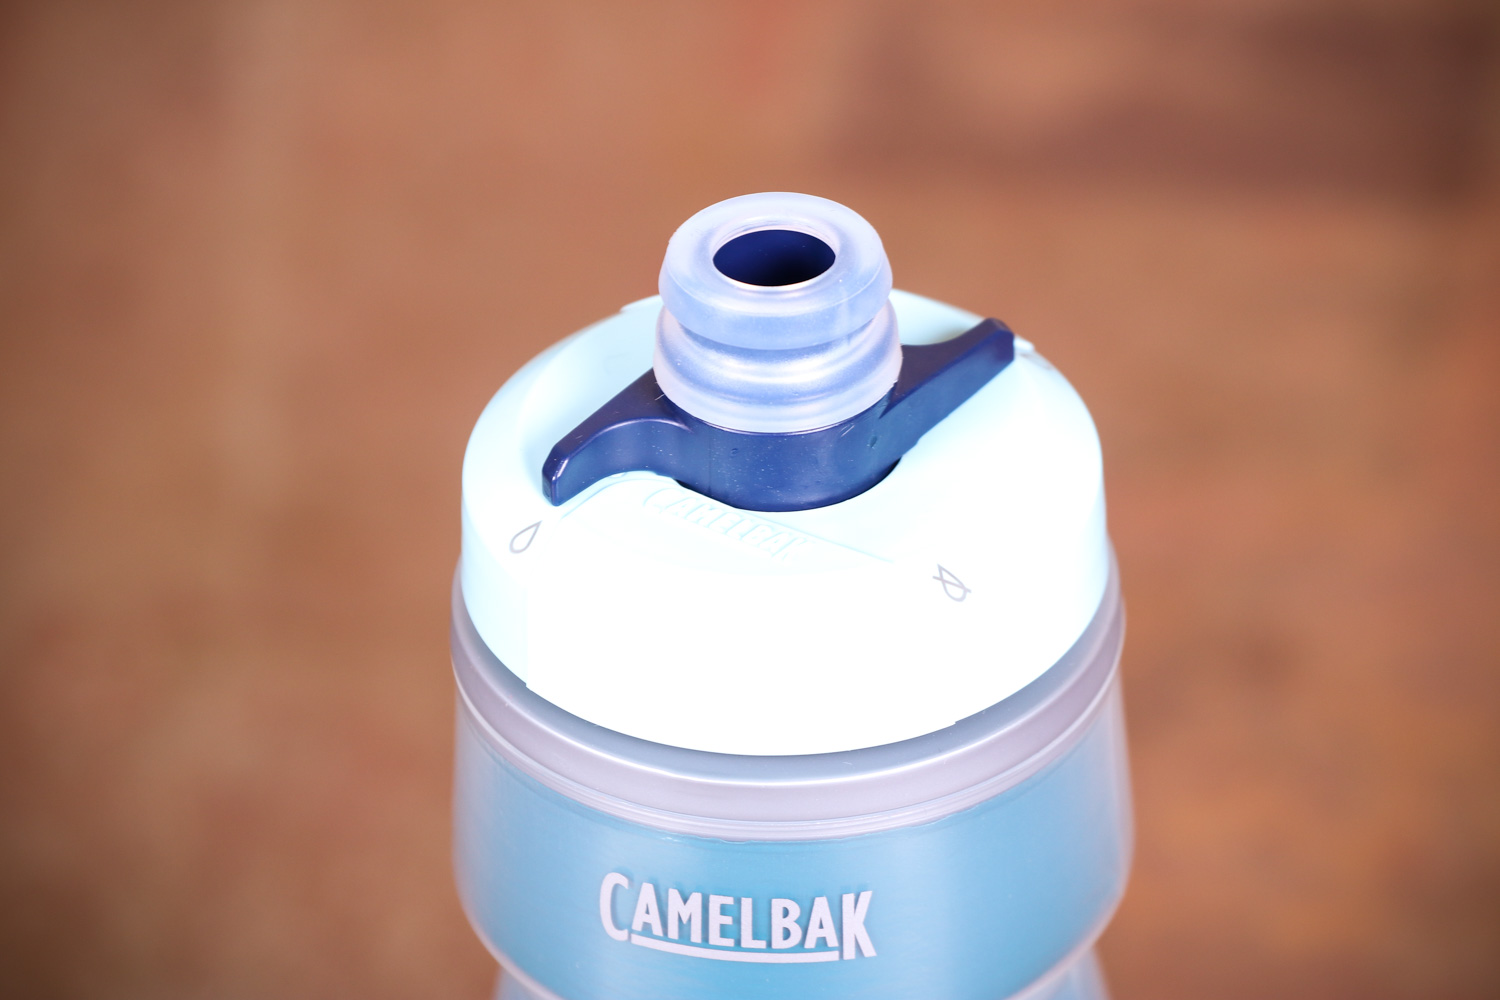 skade godt foran Review: Camelbak Podium Chill Insulated Bottle | road.cc